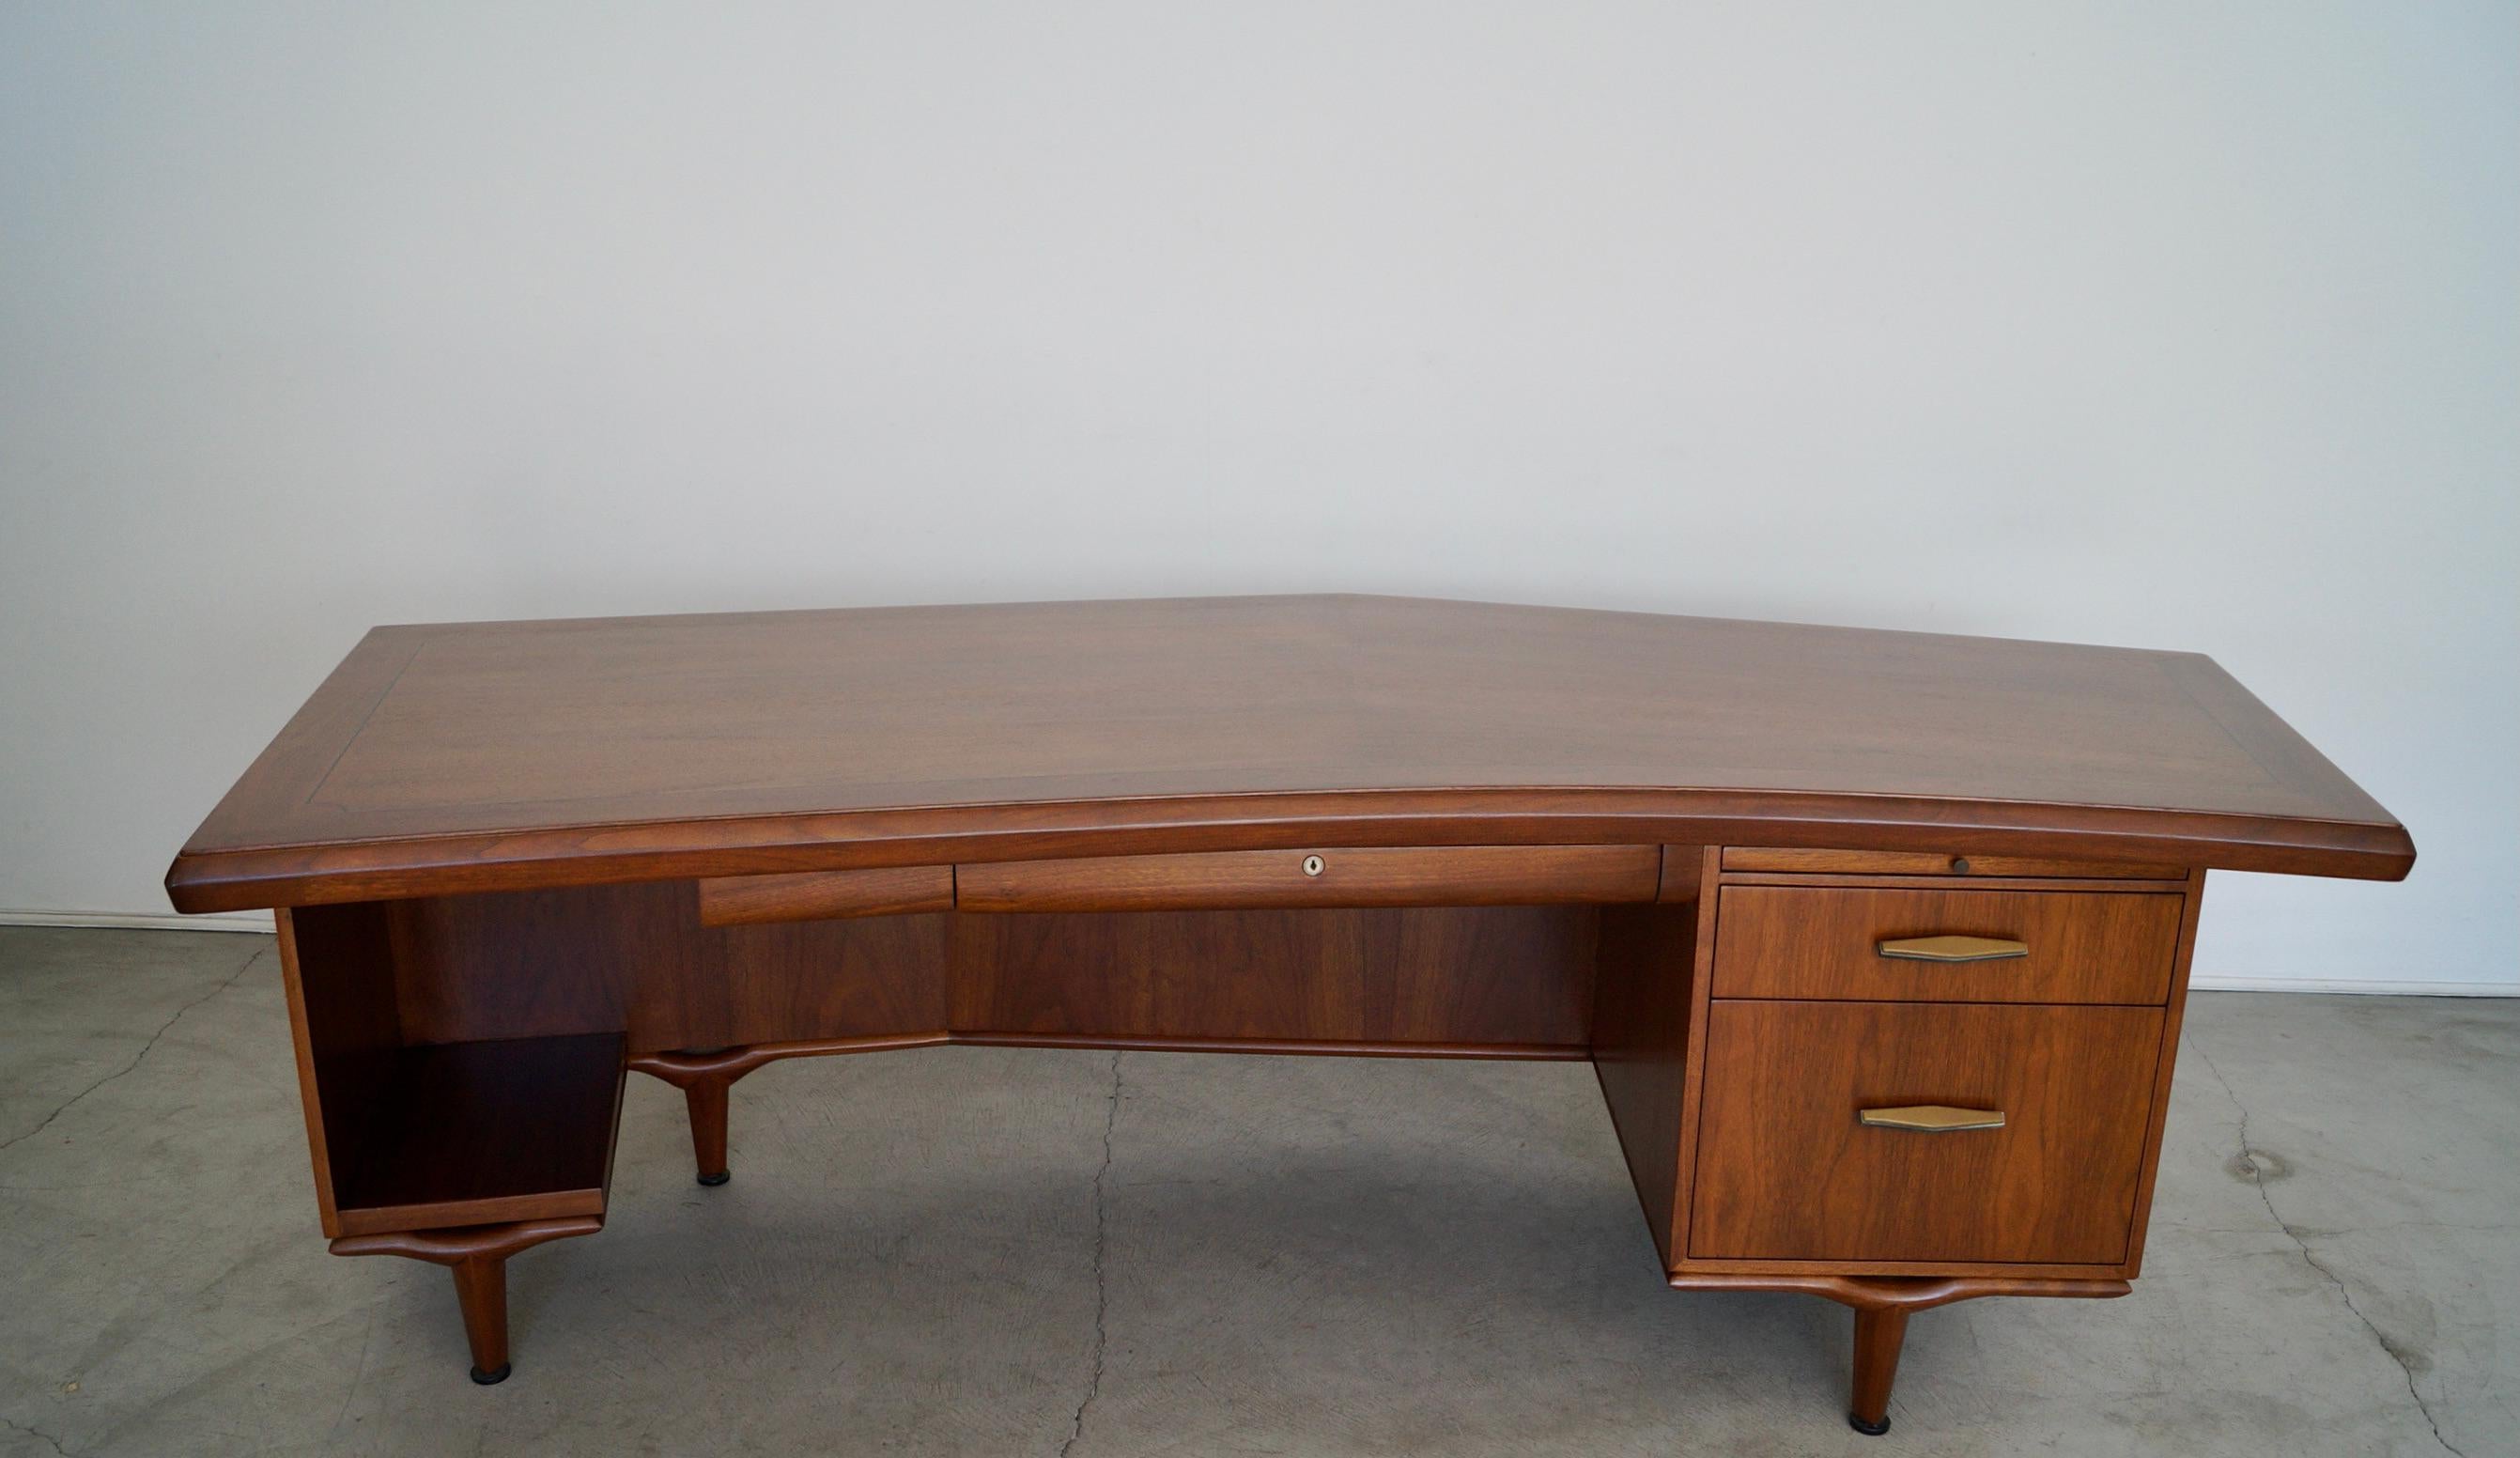 Vintage 1950's Mid-century Modern boomerang desk for sale. Manufactured by Monteverdi Young in Beverly Hills, California in the 50's, and has been beautifully restored. It has a boomerang shape, and is really well made. It has three total drawers,